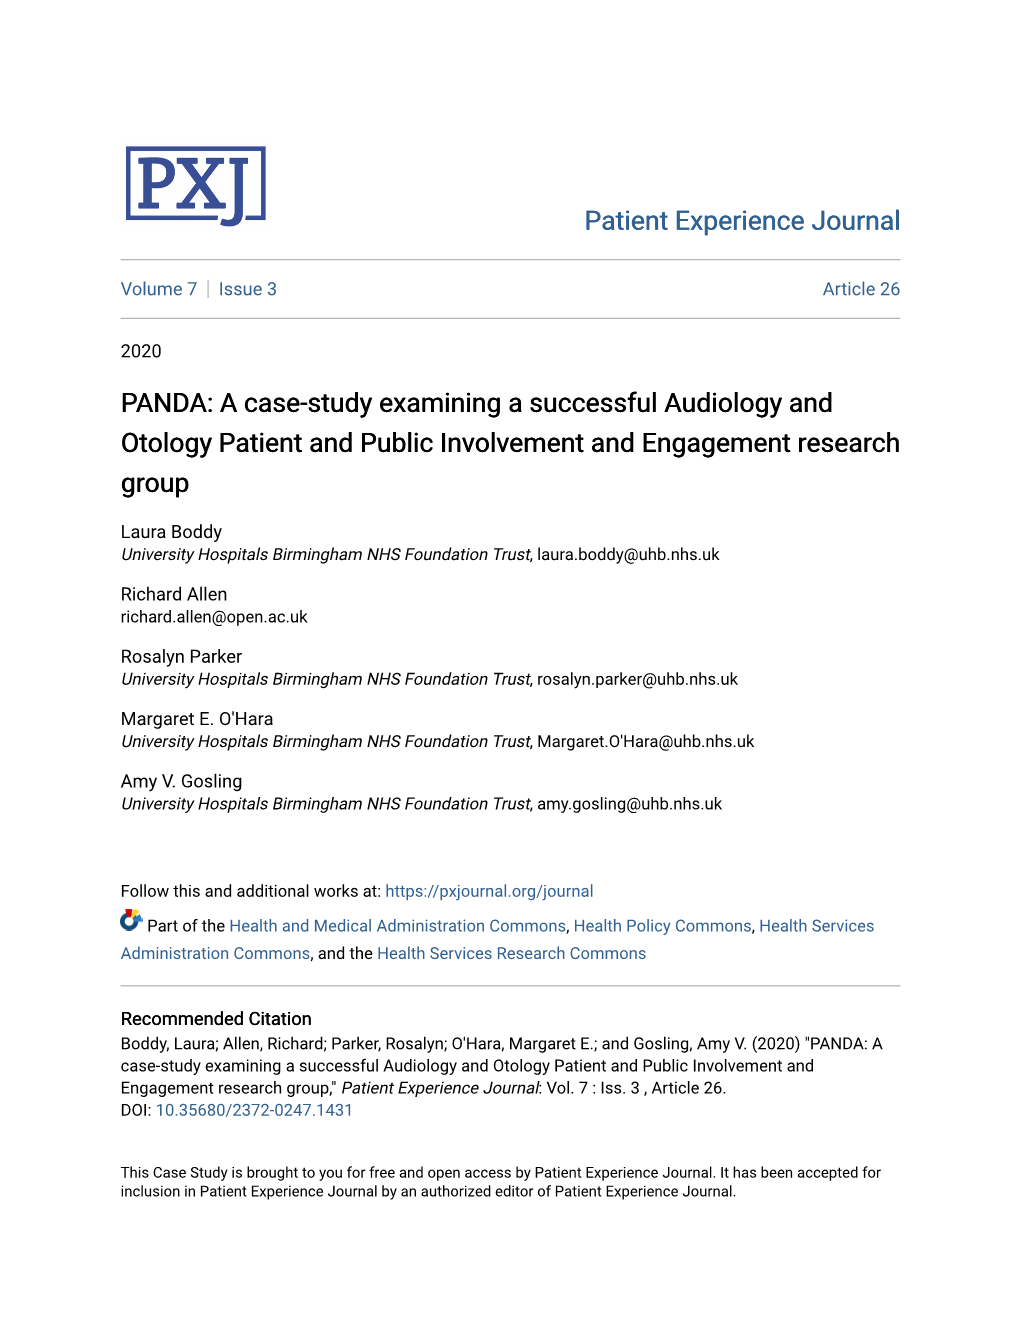 PANDA: a Case-Study Examining a Successful Audiology and Otology Patient and Public Involvement and Engagement Research Group